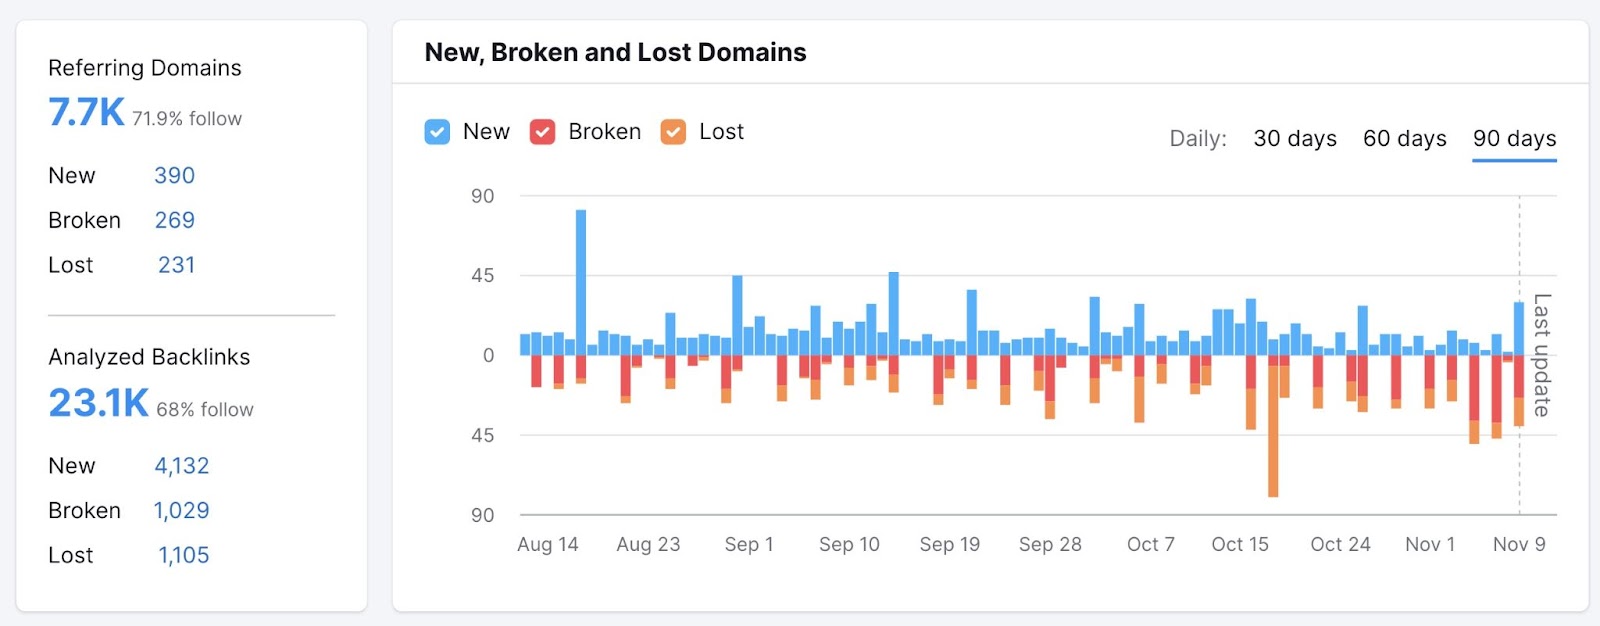 a study  showing new, broken, and mislaid  domains